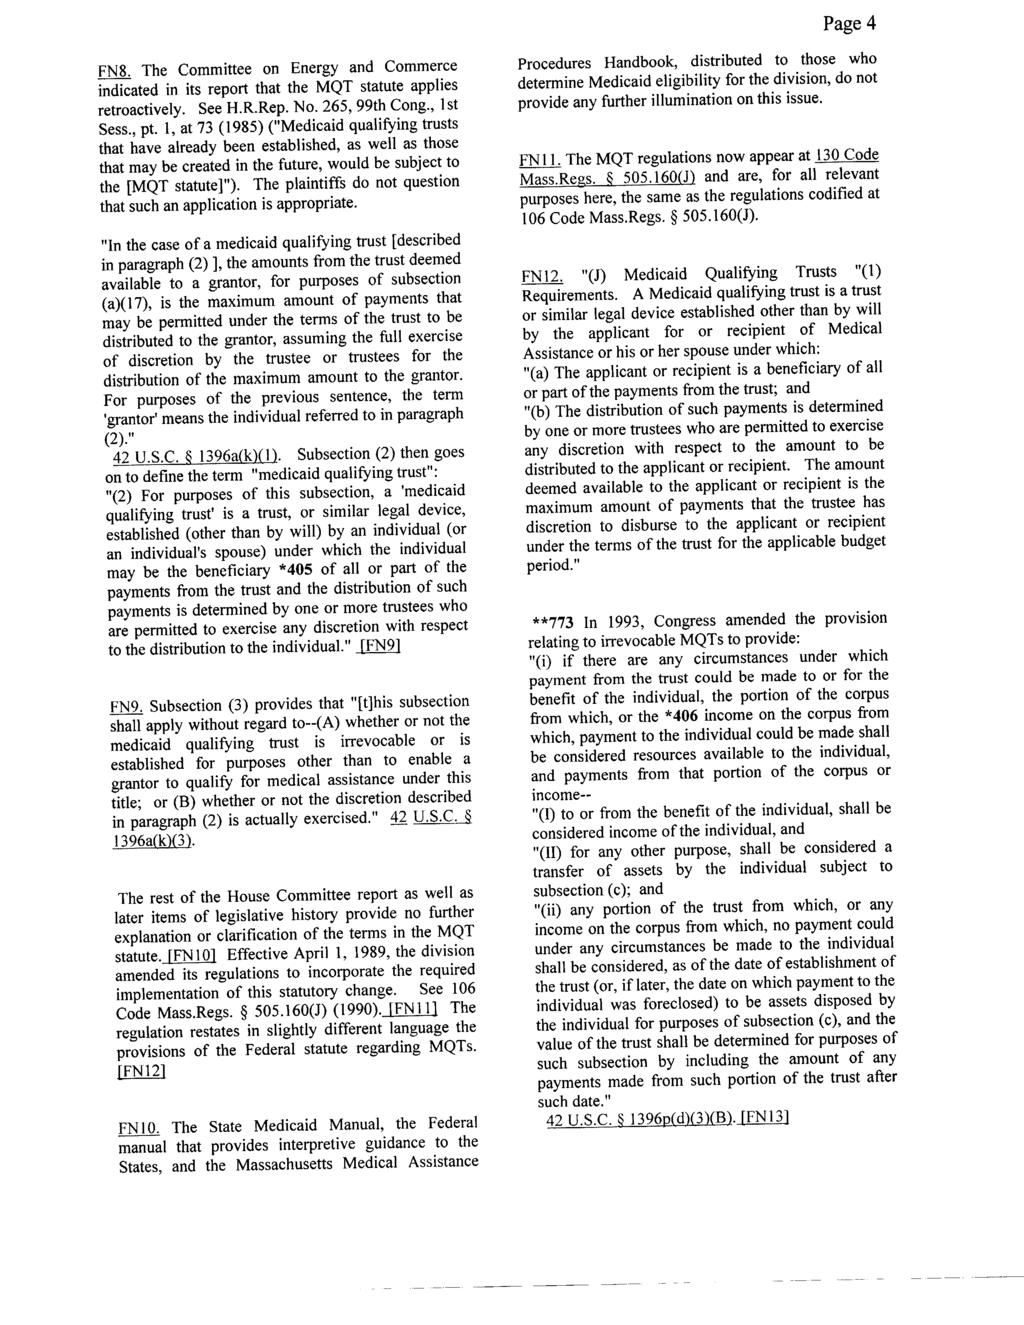 Page 4 FN8. The Committee on Energy and Commerce indicated in its report that the MQT statute applies retroactively. See H.R.Rep. No. 265, 99th Cong., 1 st Sess., pt.